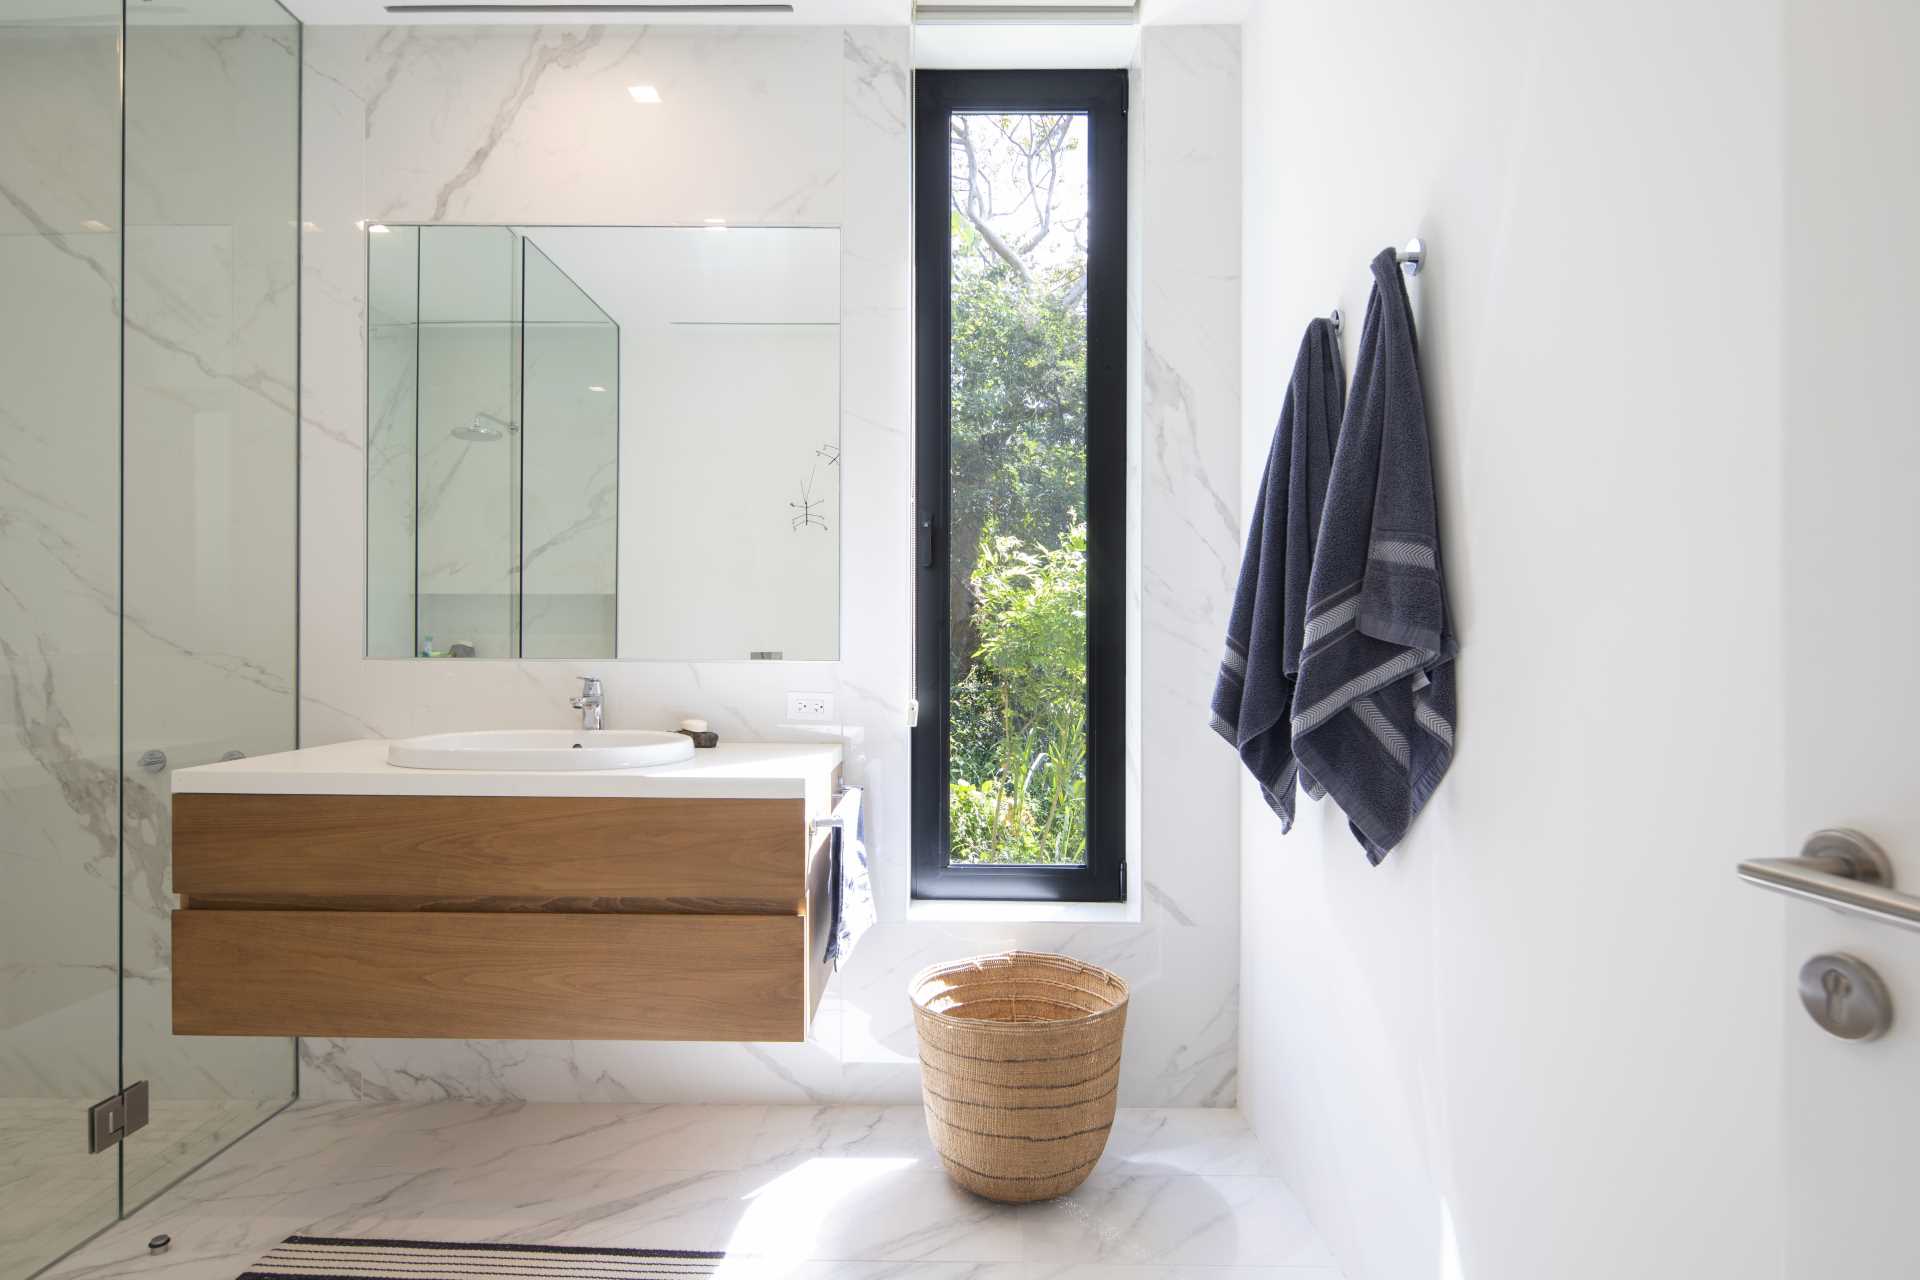 A contemporary bathroom design with a material color palette of wood, light colored tiles, white countertops, and gl،.